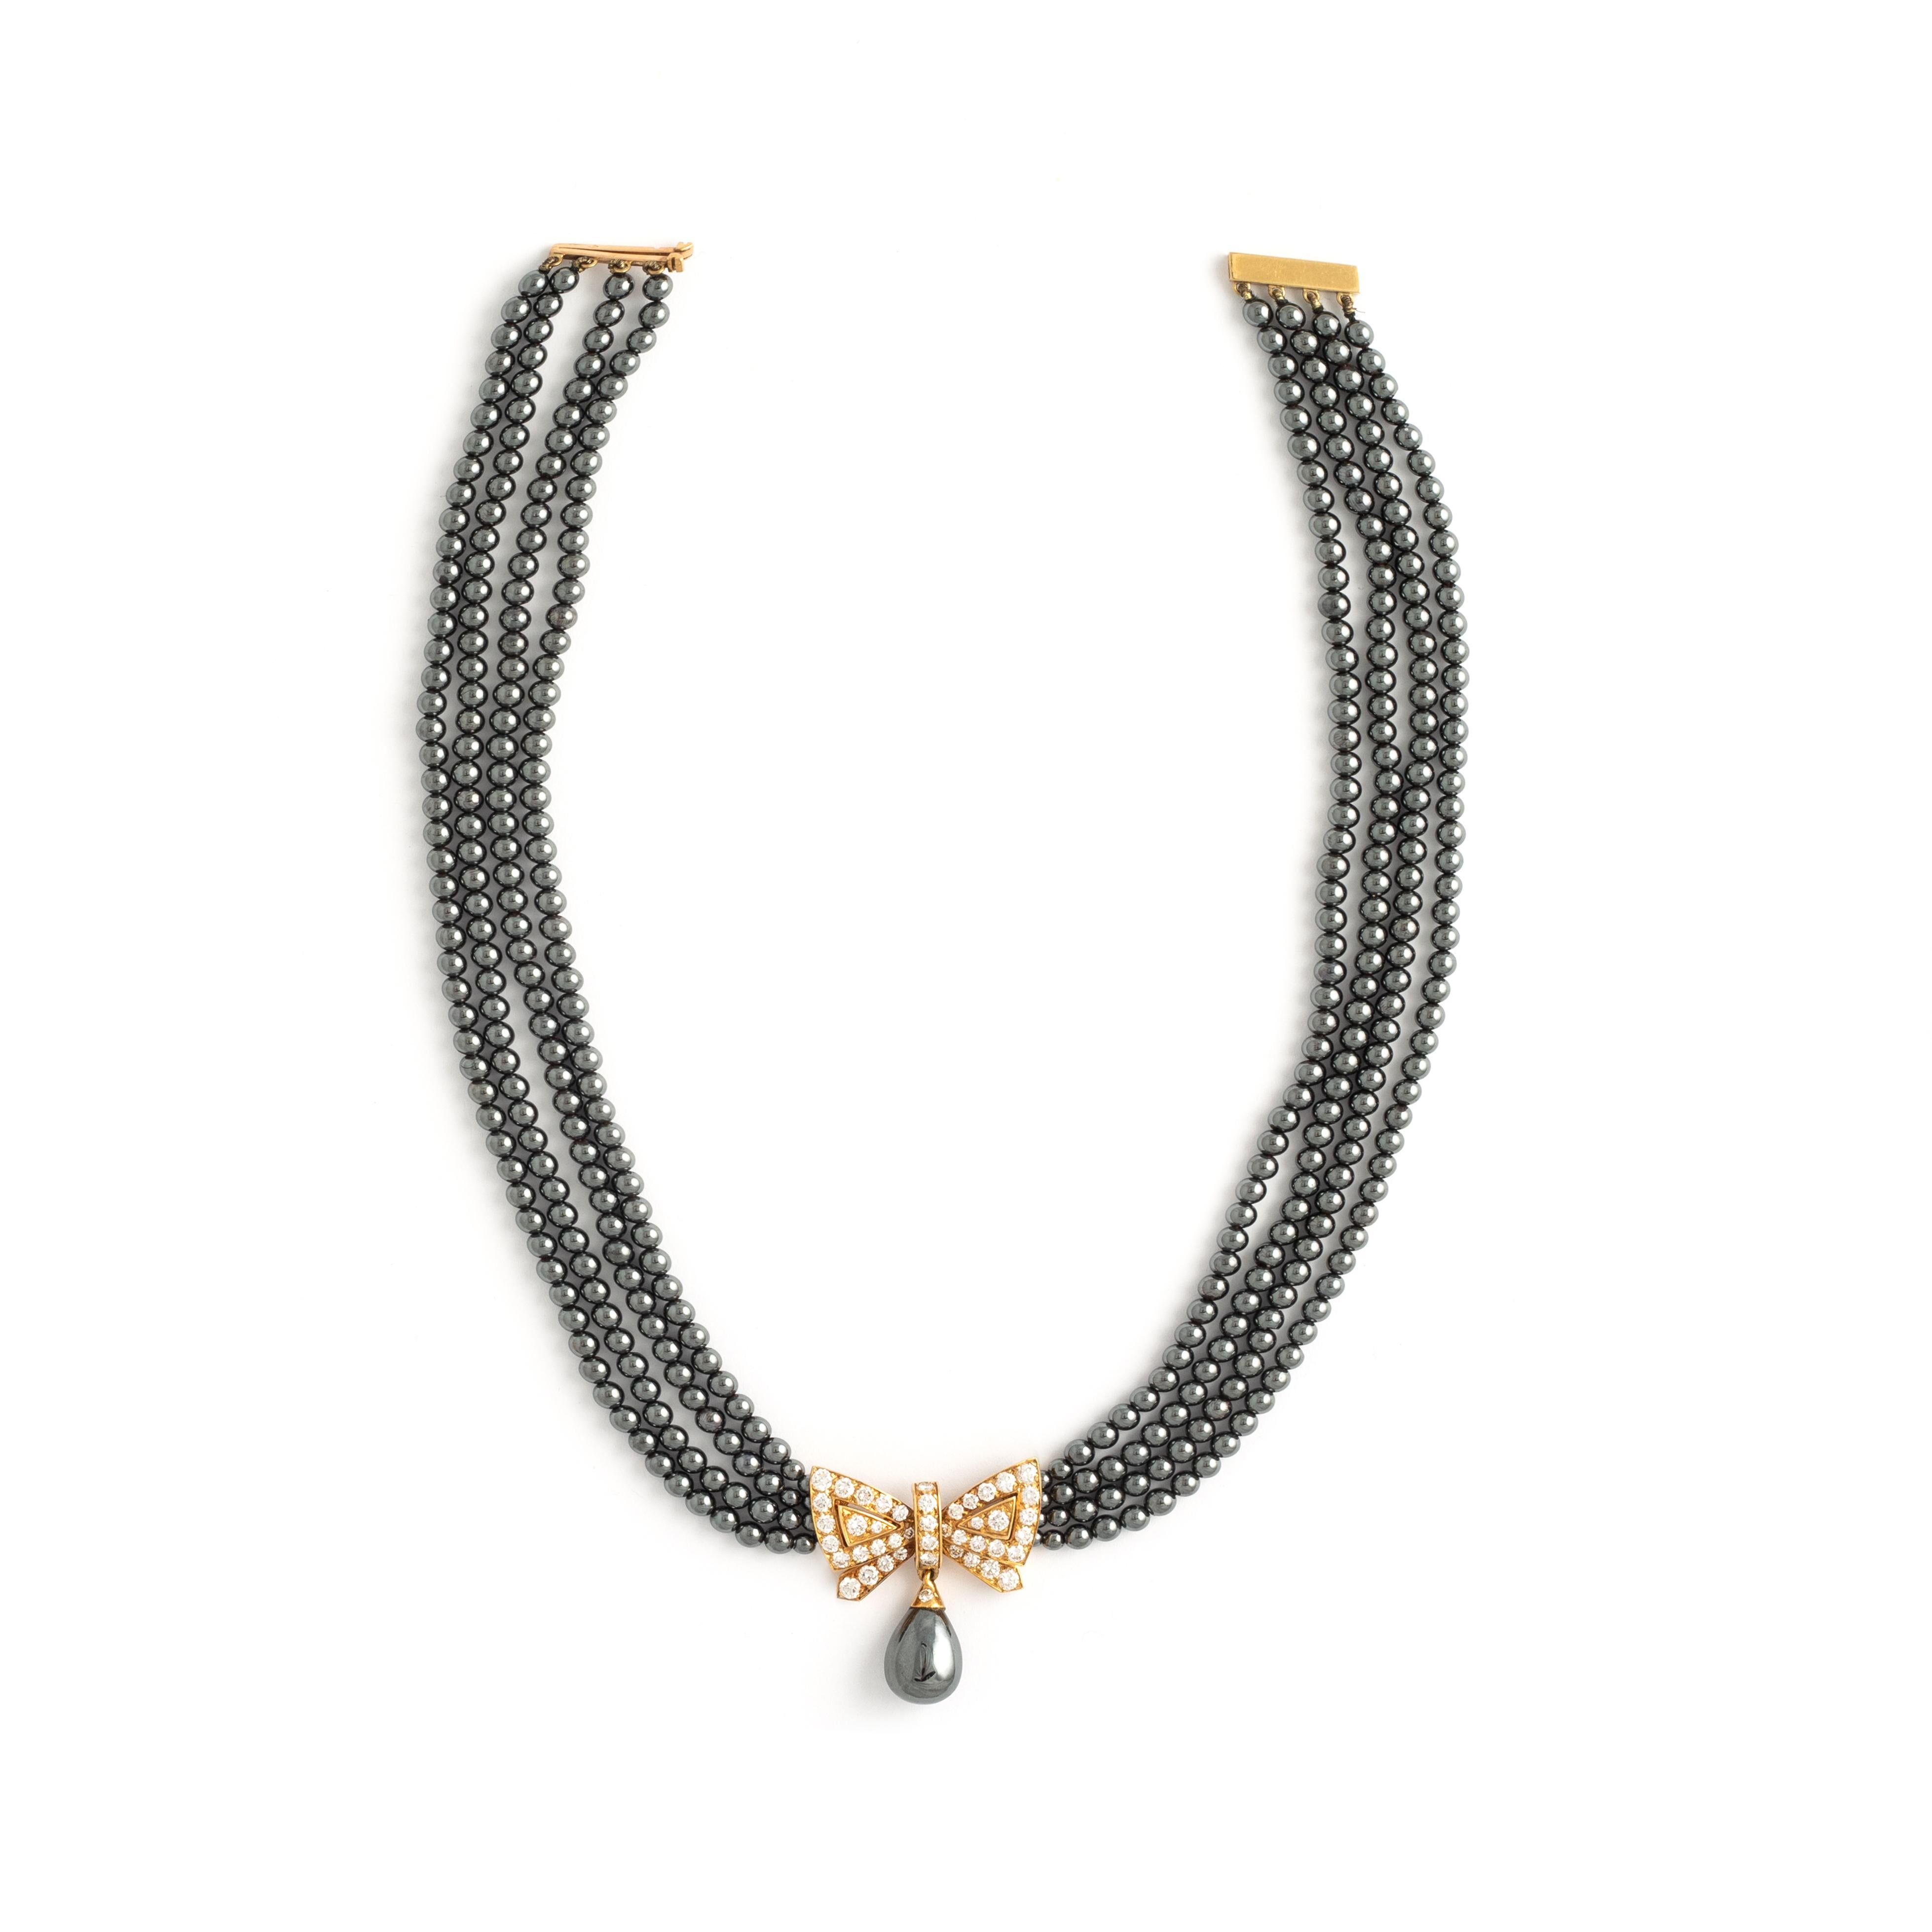 Round Cut Van Cleef and Arpels Diamond Hematite Necklace and Earrings Set For Sale